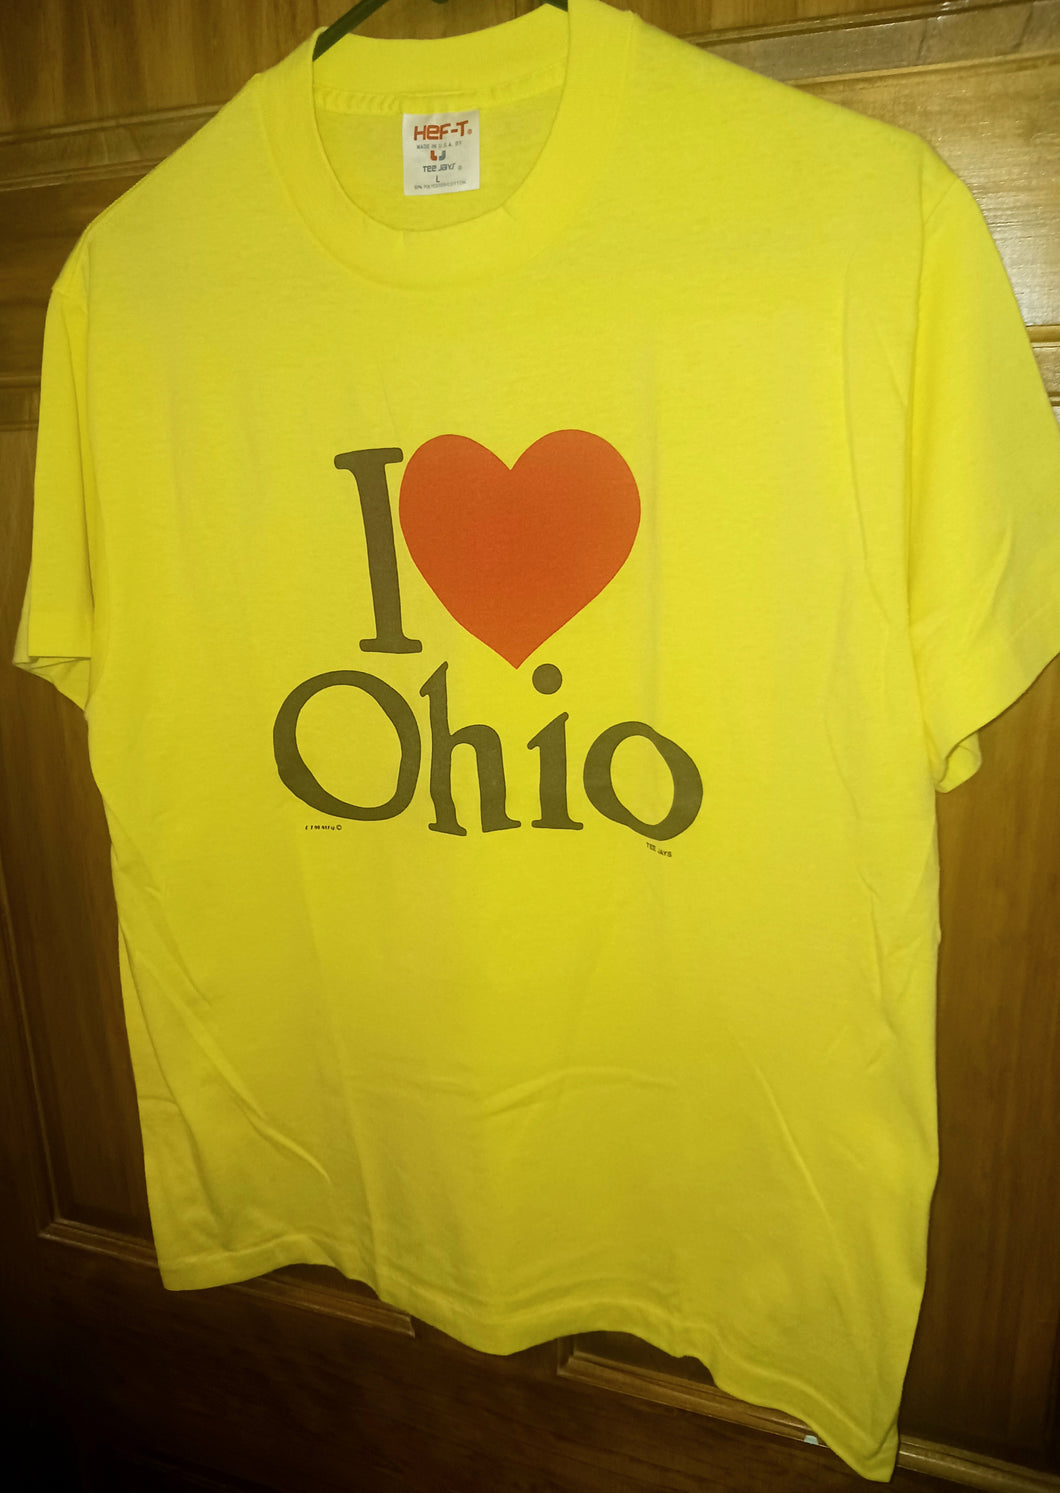 Vintage I Love Heart Ohio Yellow T-Shirt Adults Size Large 1980s Hef-T Tee Jays Made in USA Single Stitch Seams Estate Find